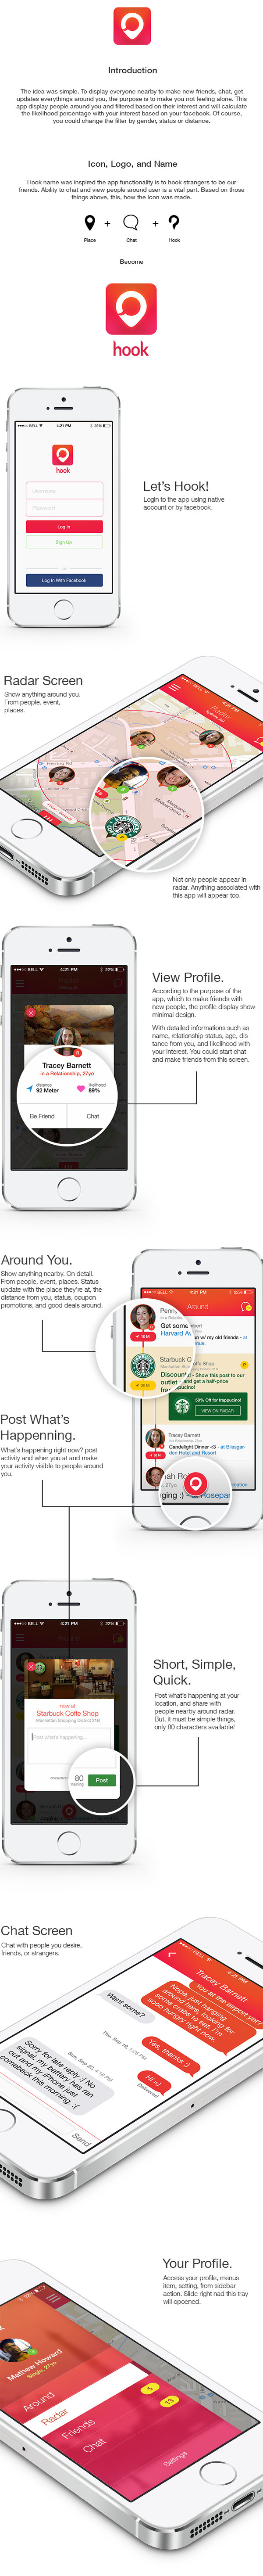 iOS 7 foursquare location based starbucks nearby concept app facebook